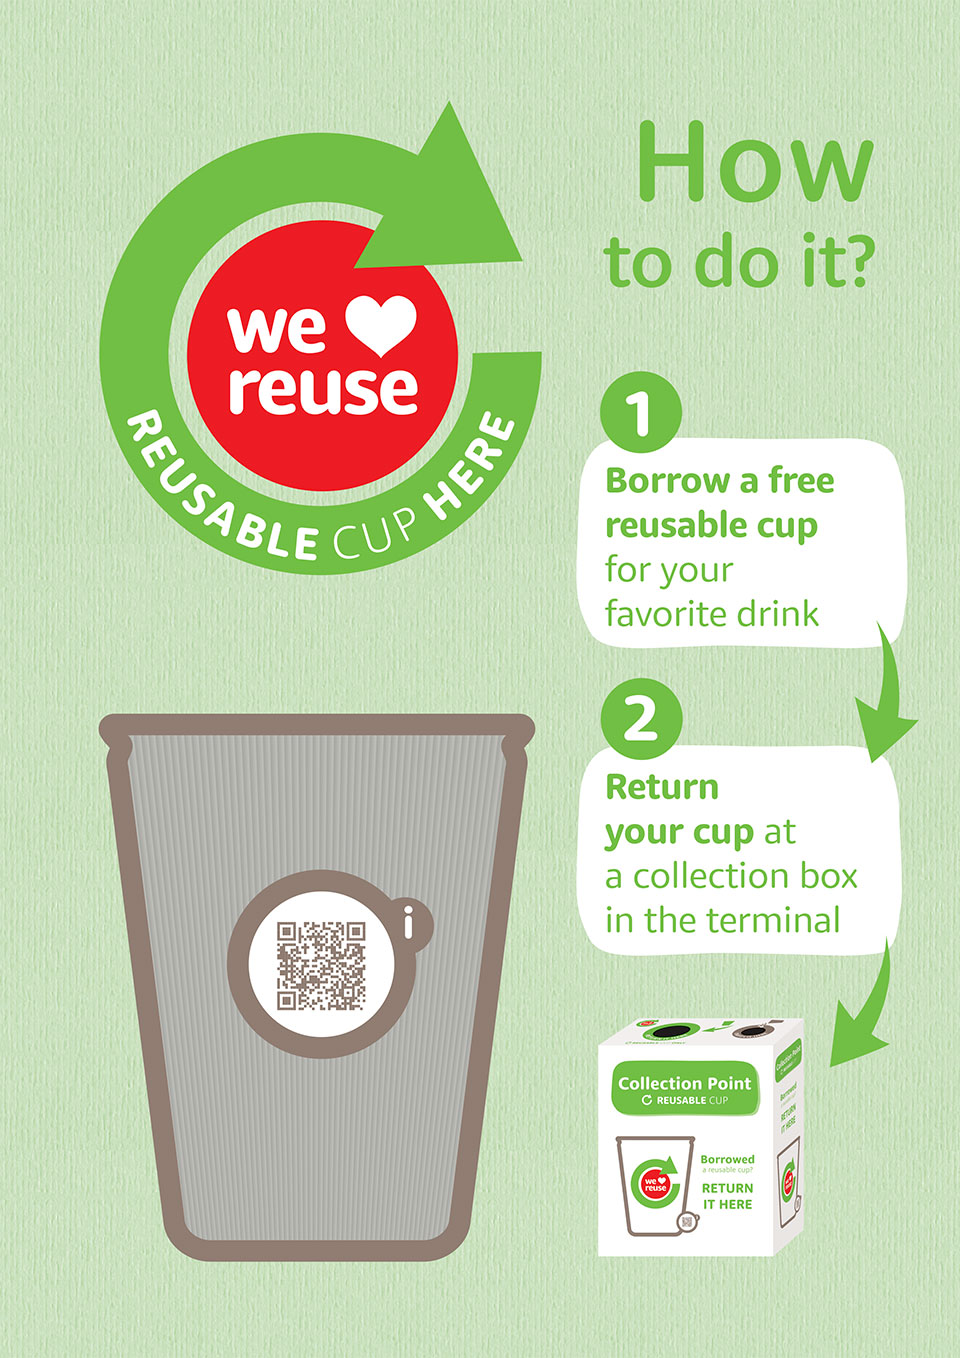 Reusable cup here